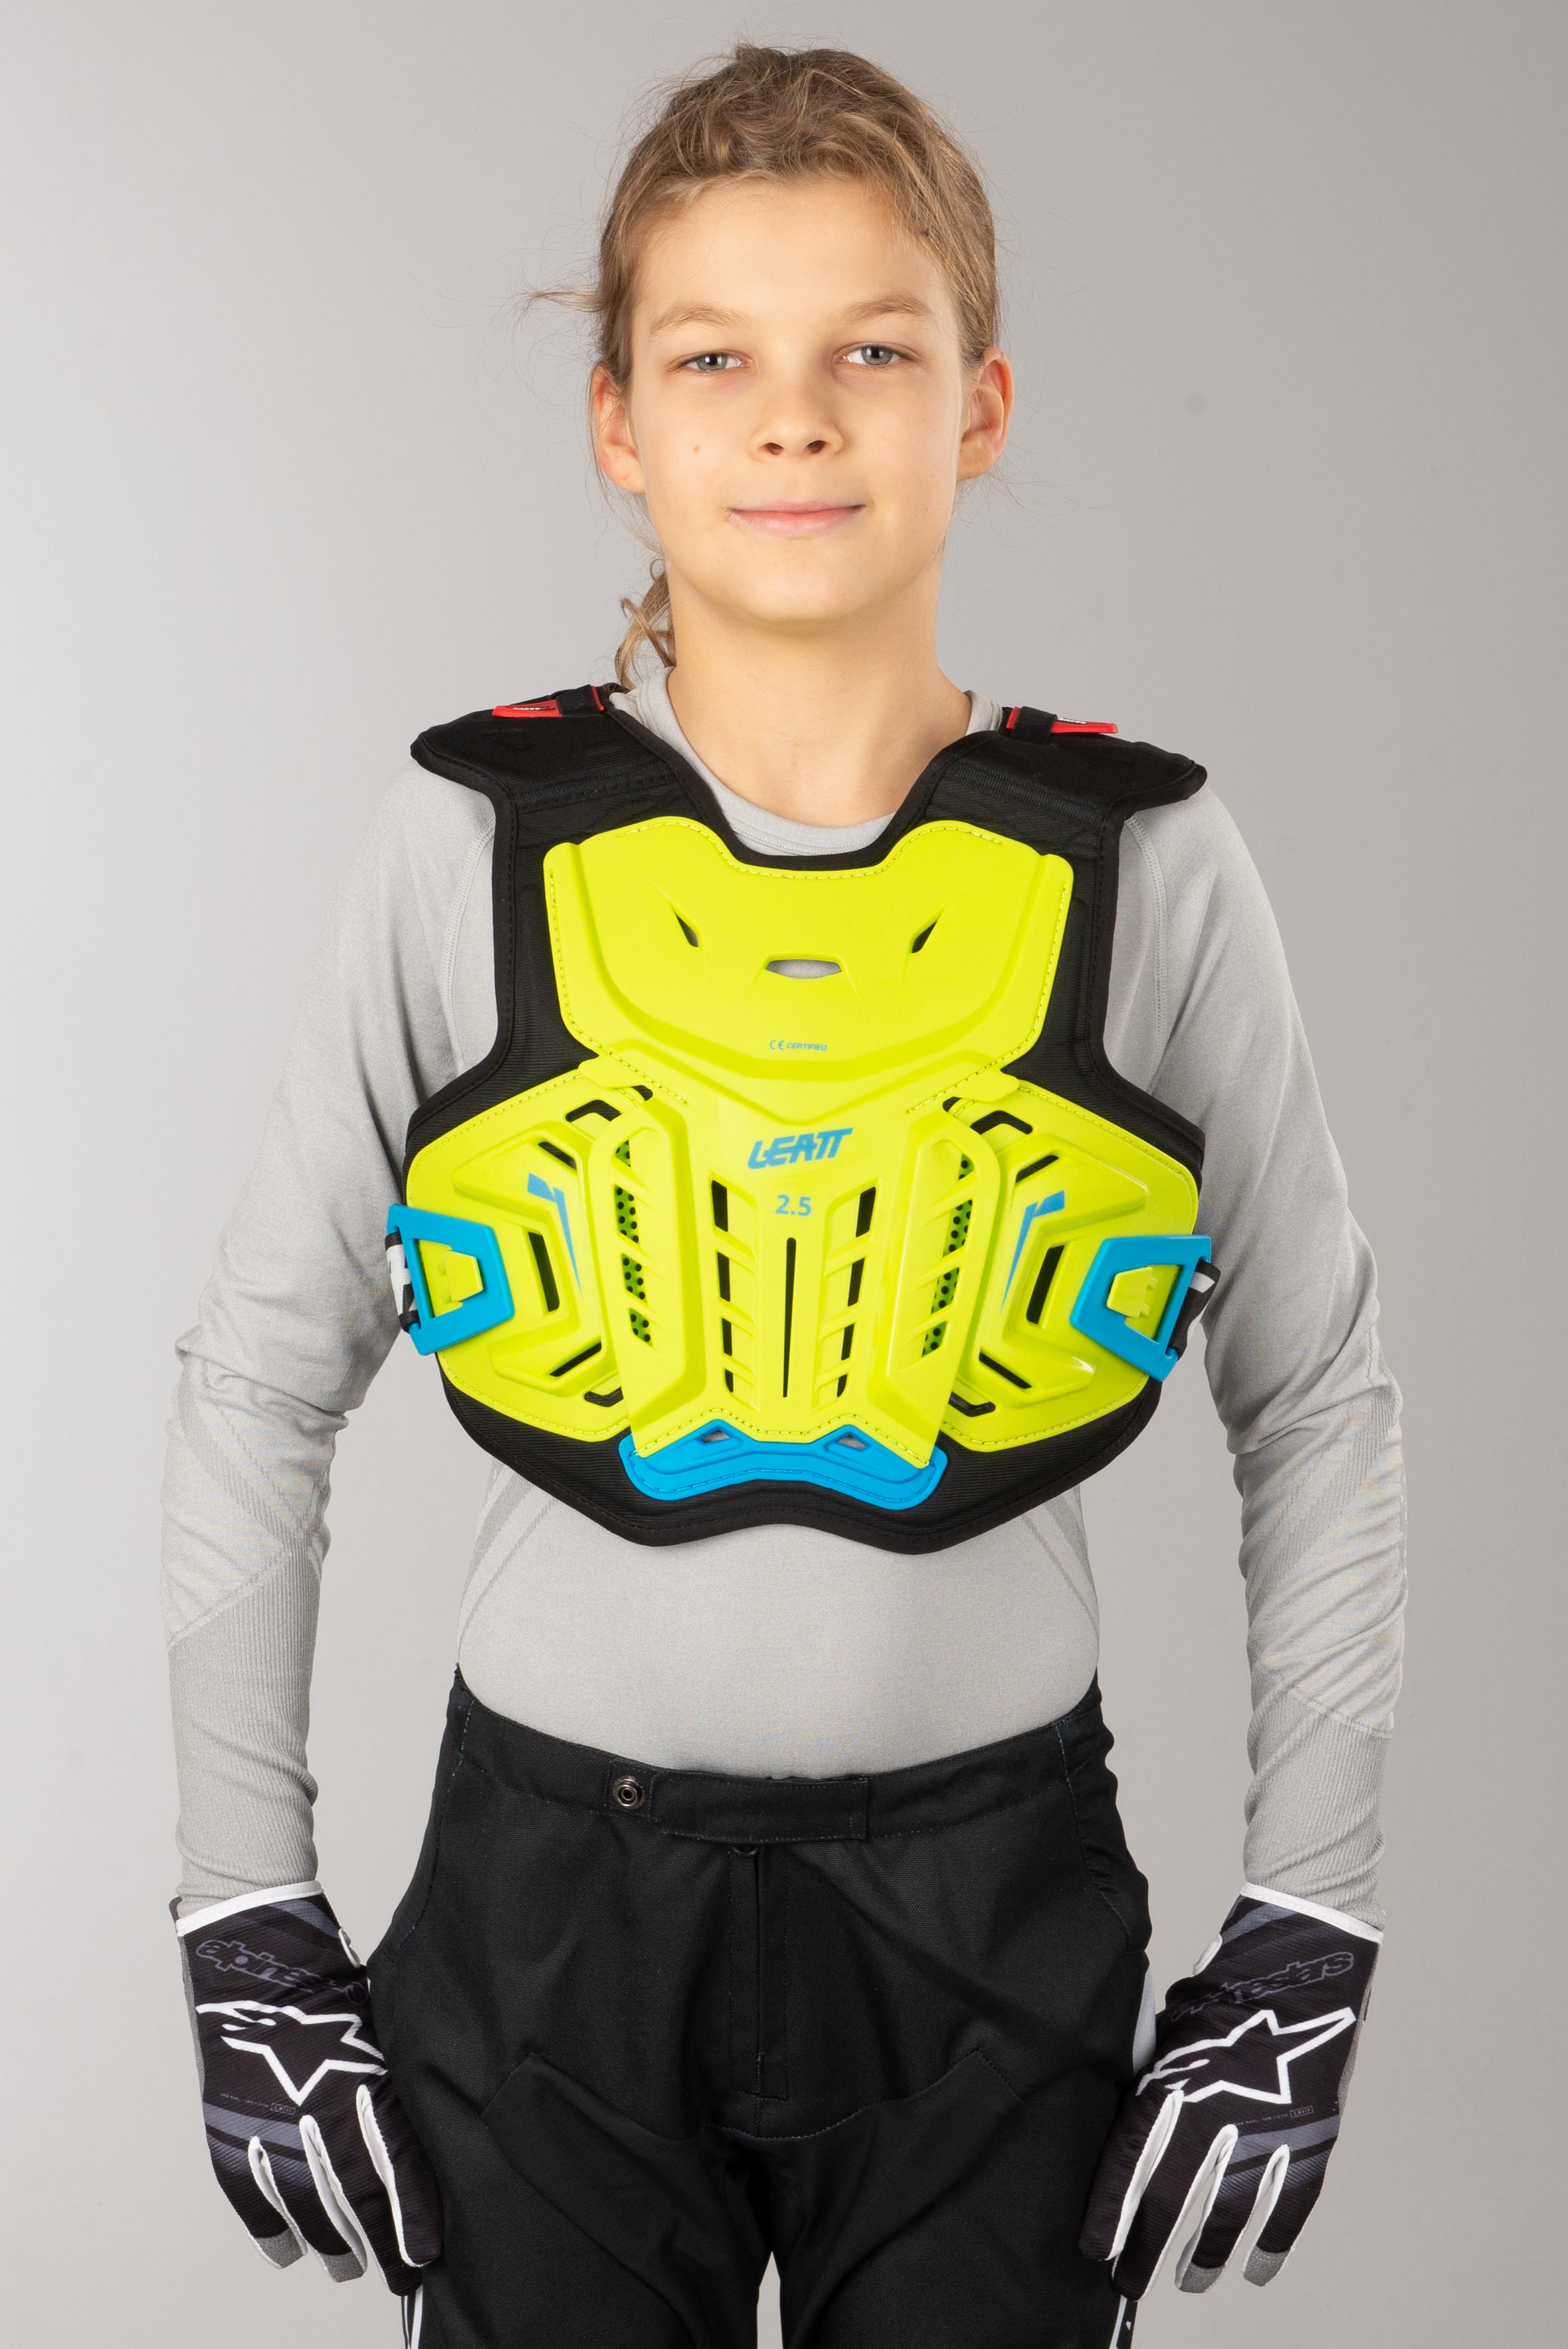 leatt youth chest protector